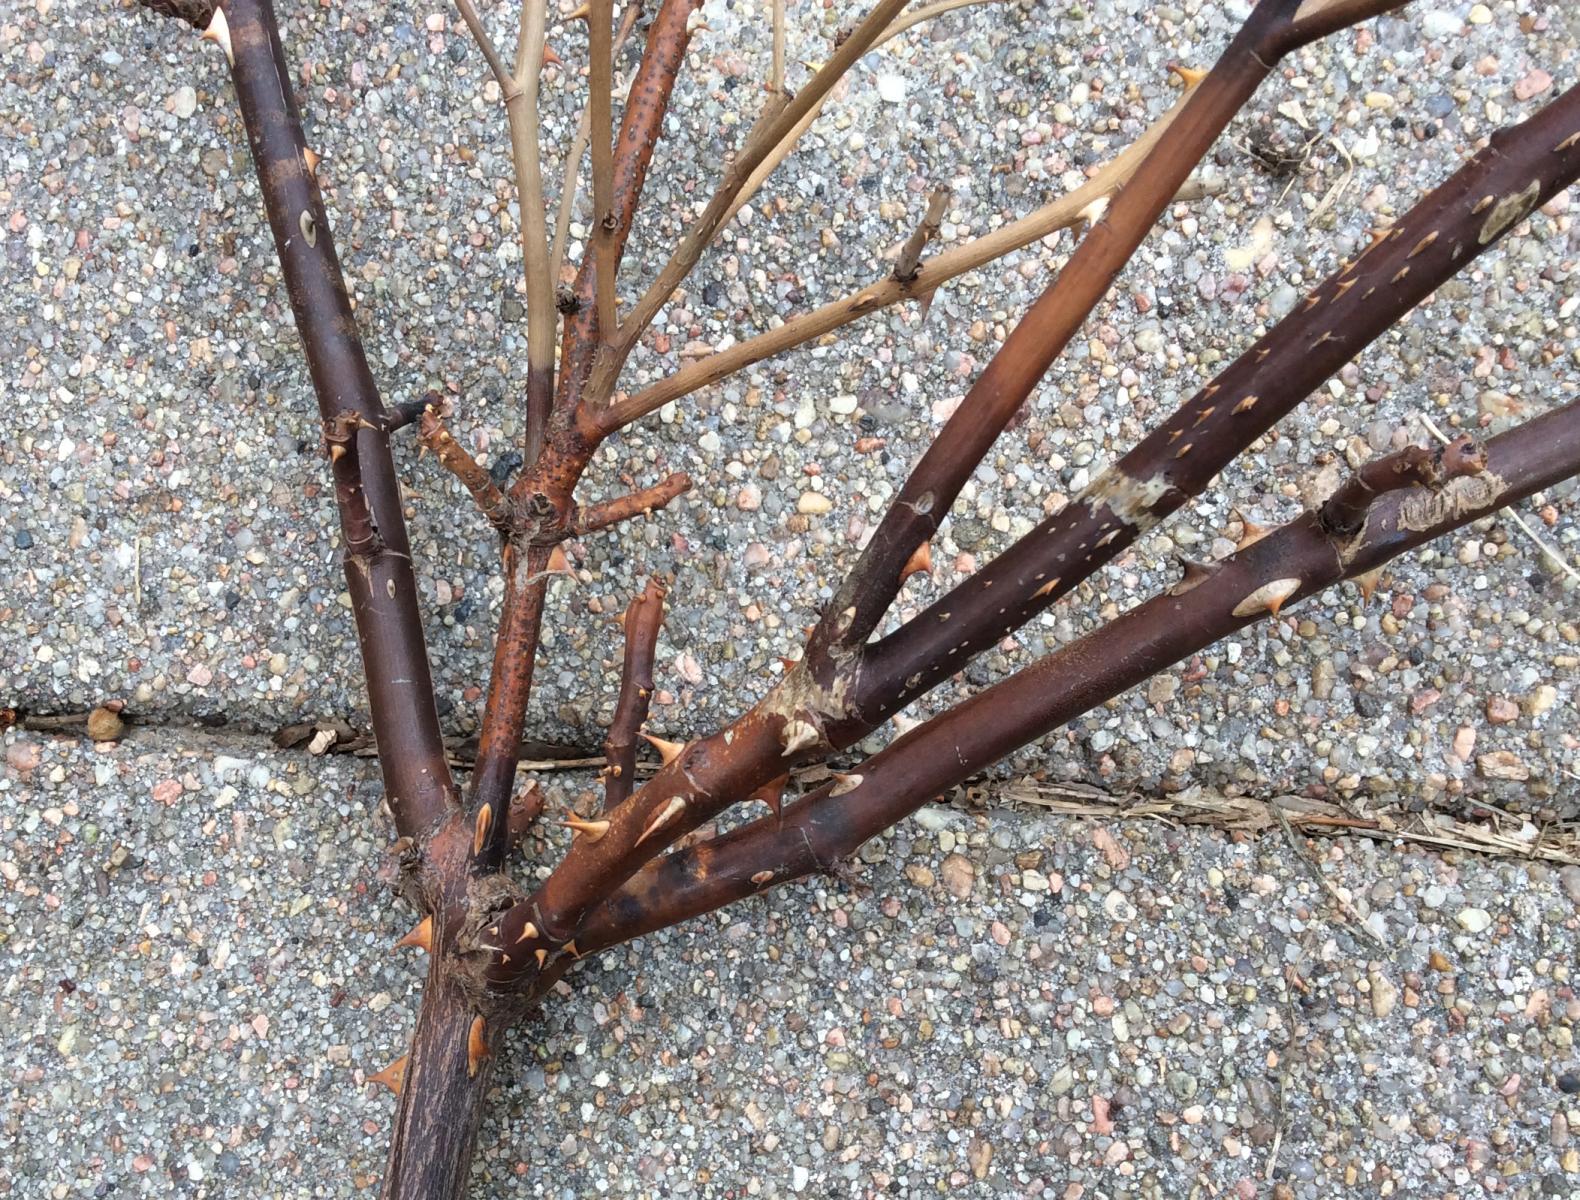 Brown or black rose stems are dead and will not generate any new growth. Prune them out.